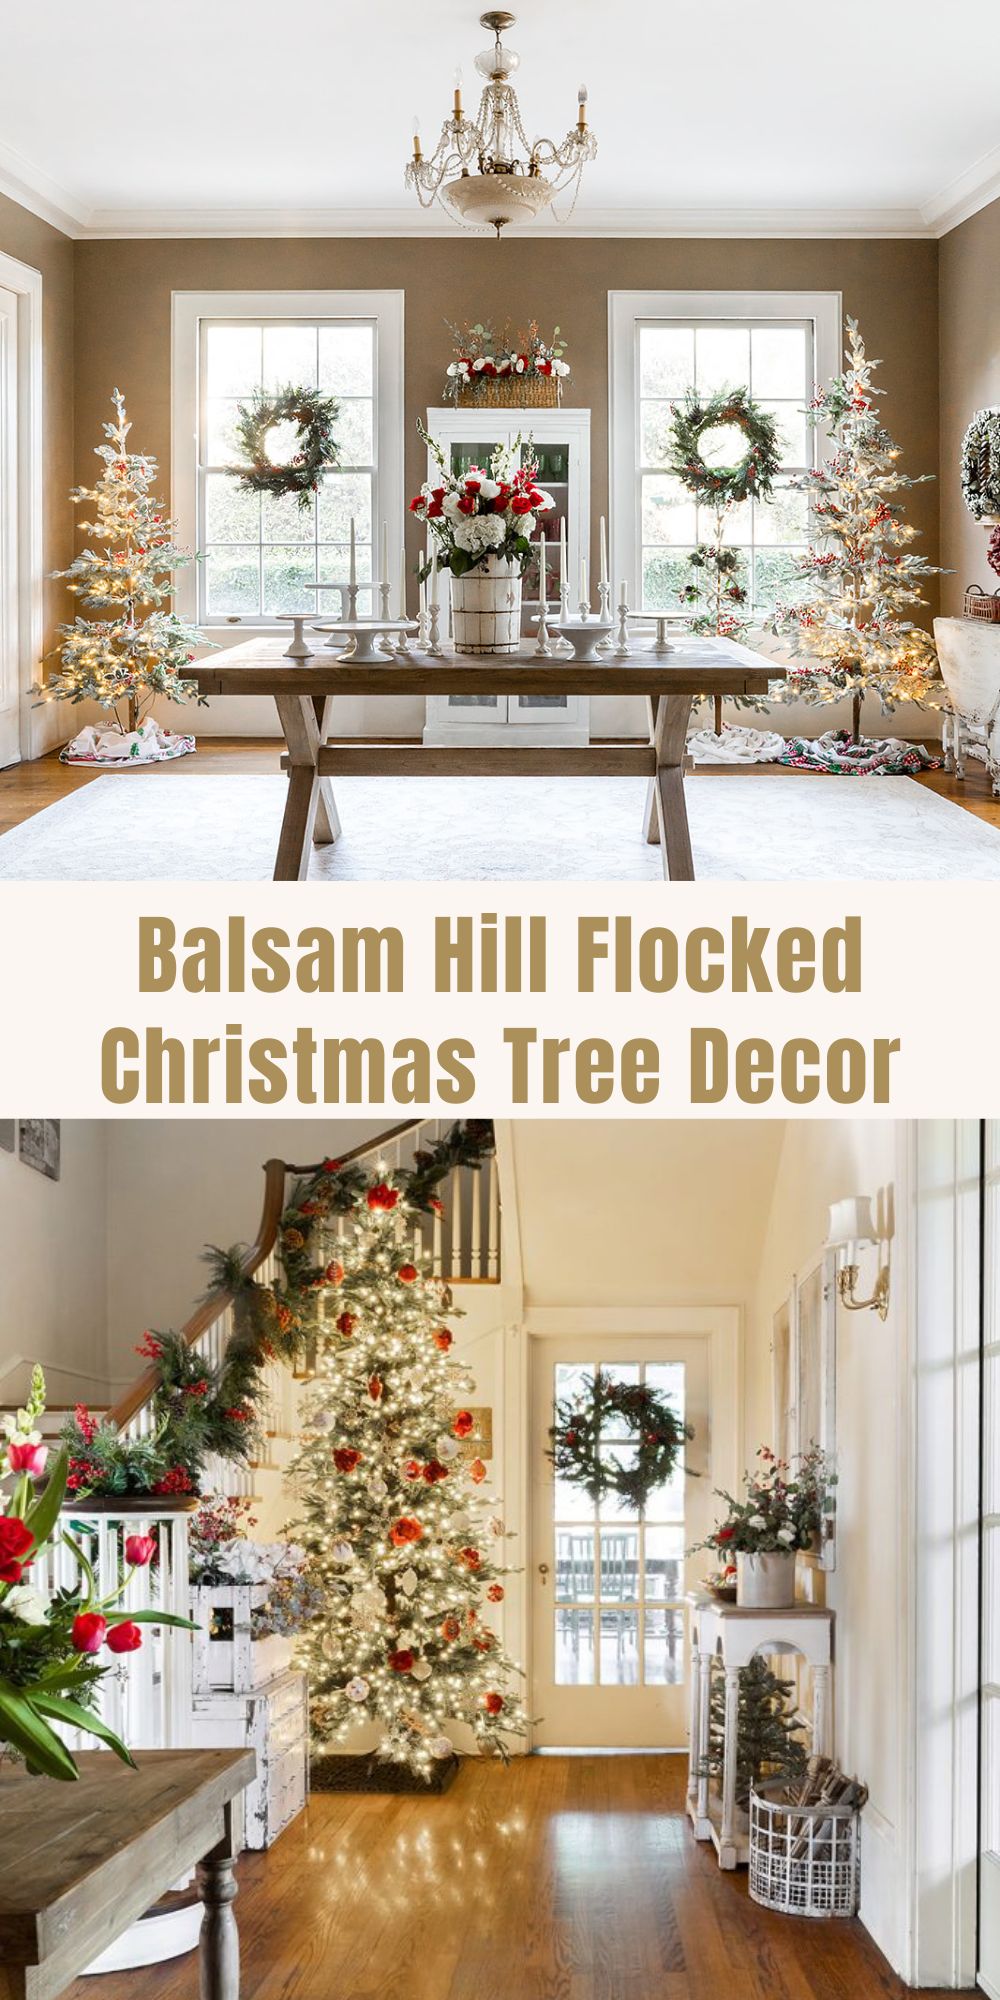 In my book A Home to Share, I featured our Christmas party. The flocked Christmas trees, wreaths, and garlands are from Balsam Hill.